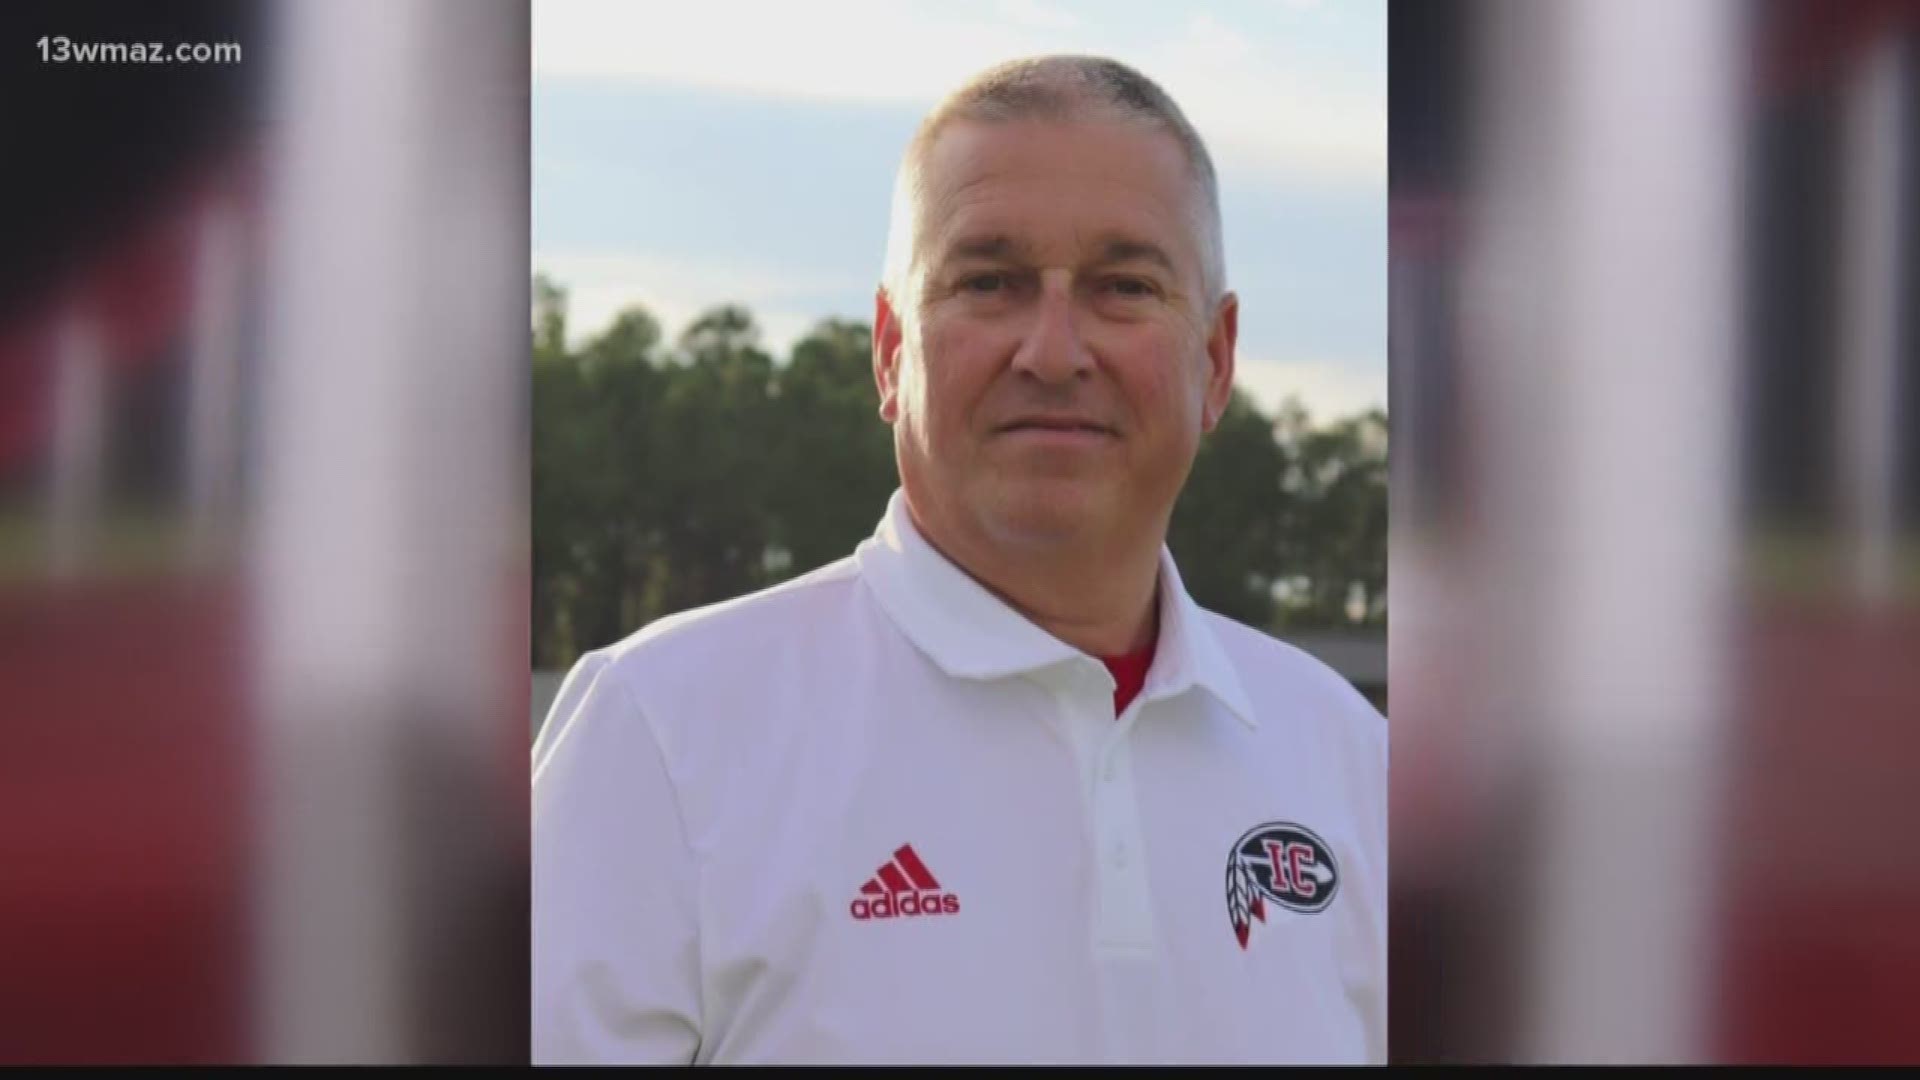 Irwin County Head Football Coach Buddy Nobles passed away overnight after a lengthy battle with cancer. Video courtesy: GPB Sports